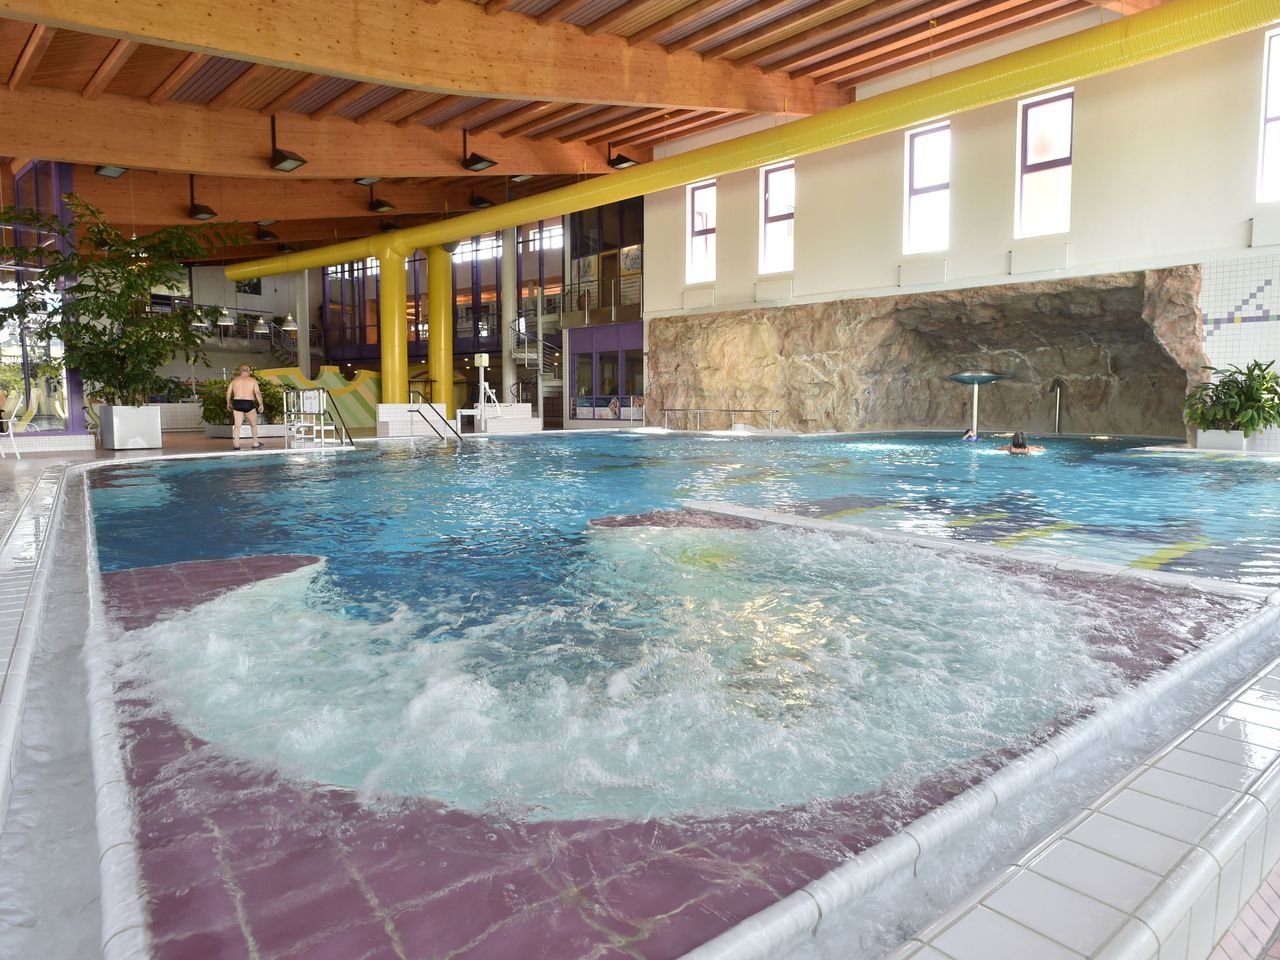 Familien-Sommer-DEAL - 4 Tage Entspannung & Therme